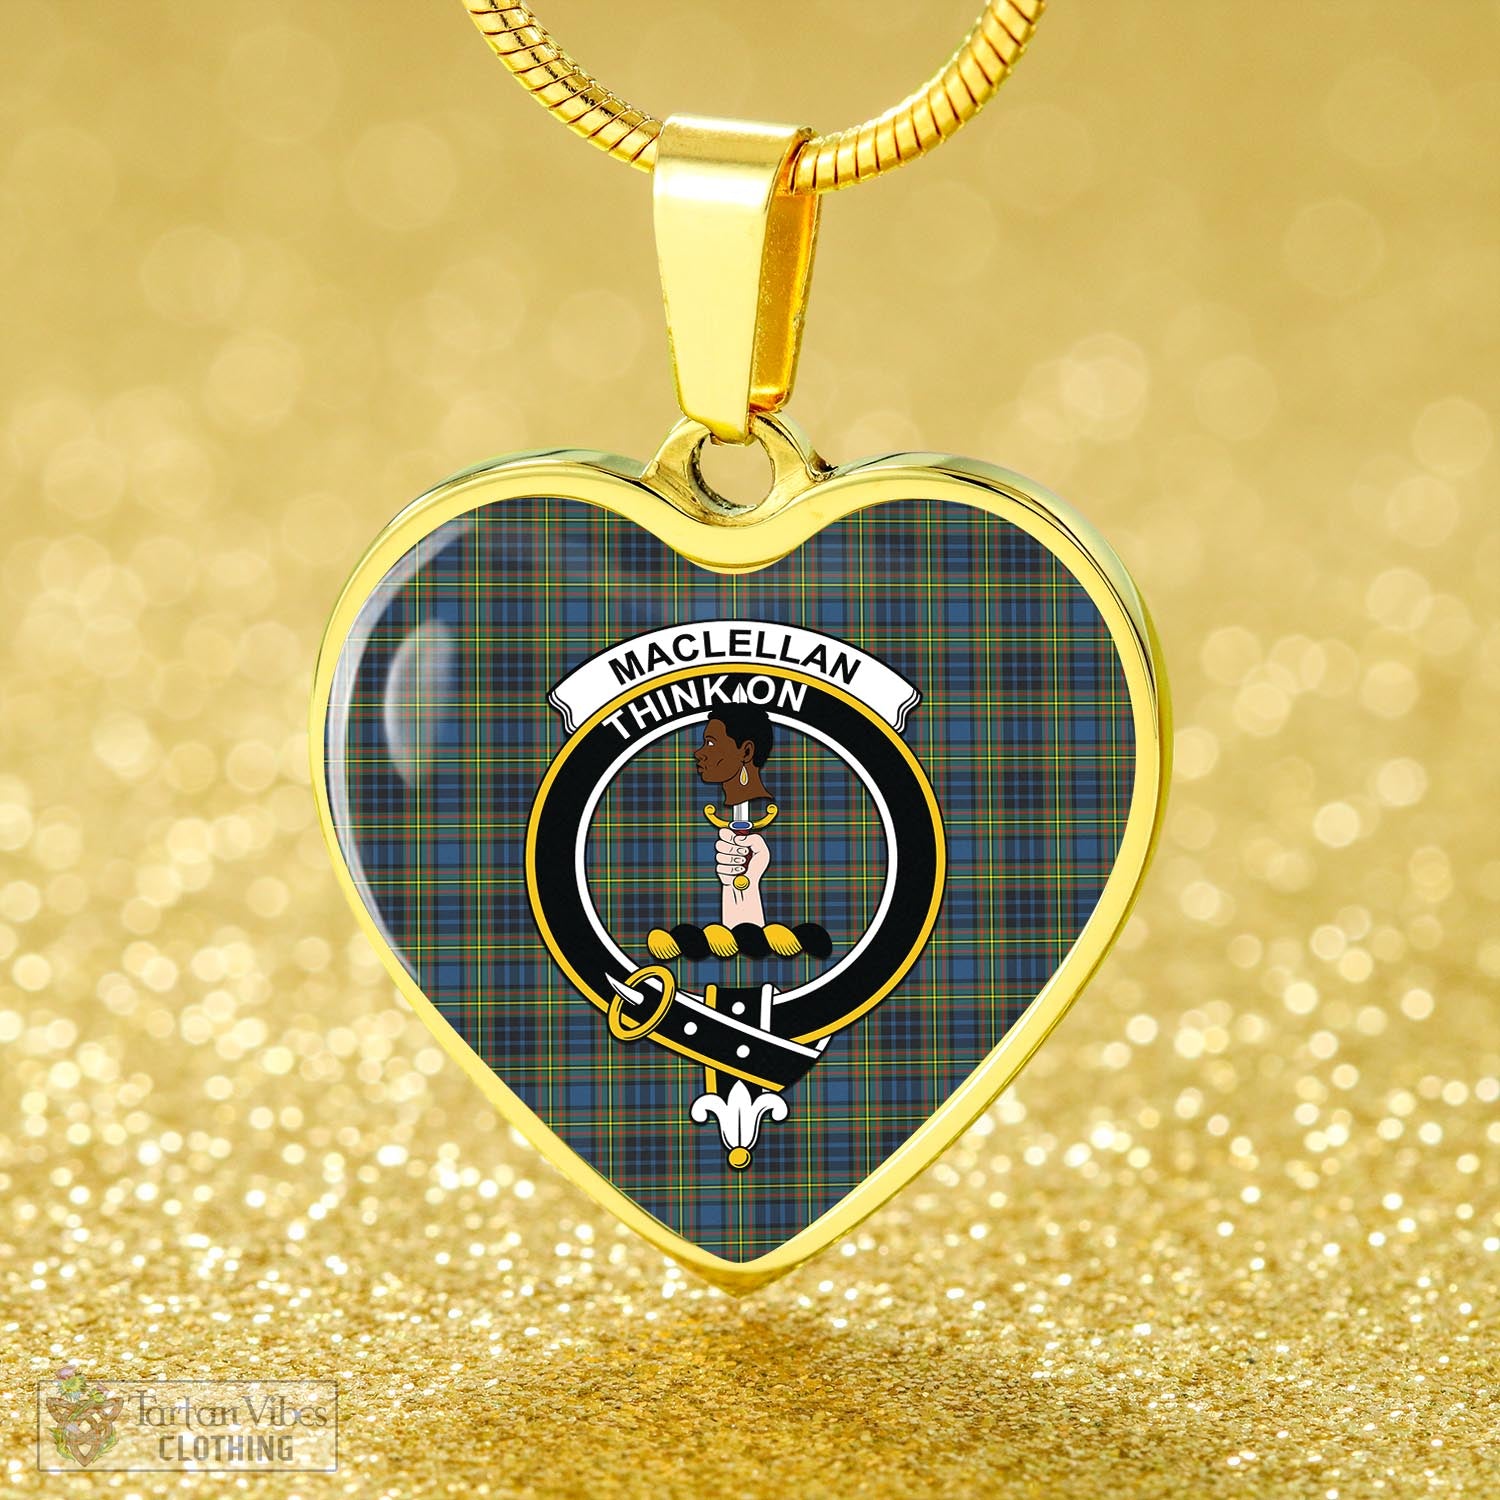 Tartan Vibes Clothing MacLellan Ancient Tartan Heart Necklace with Family Crest